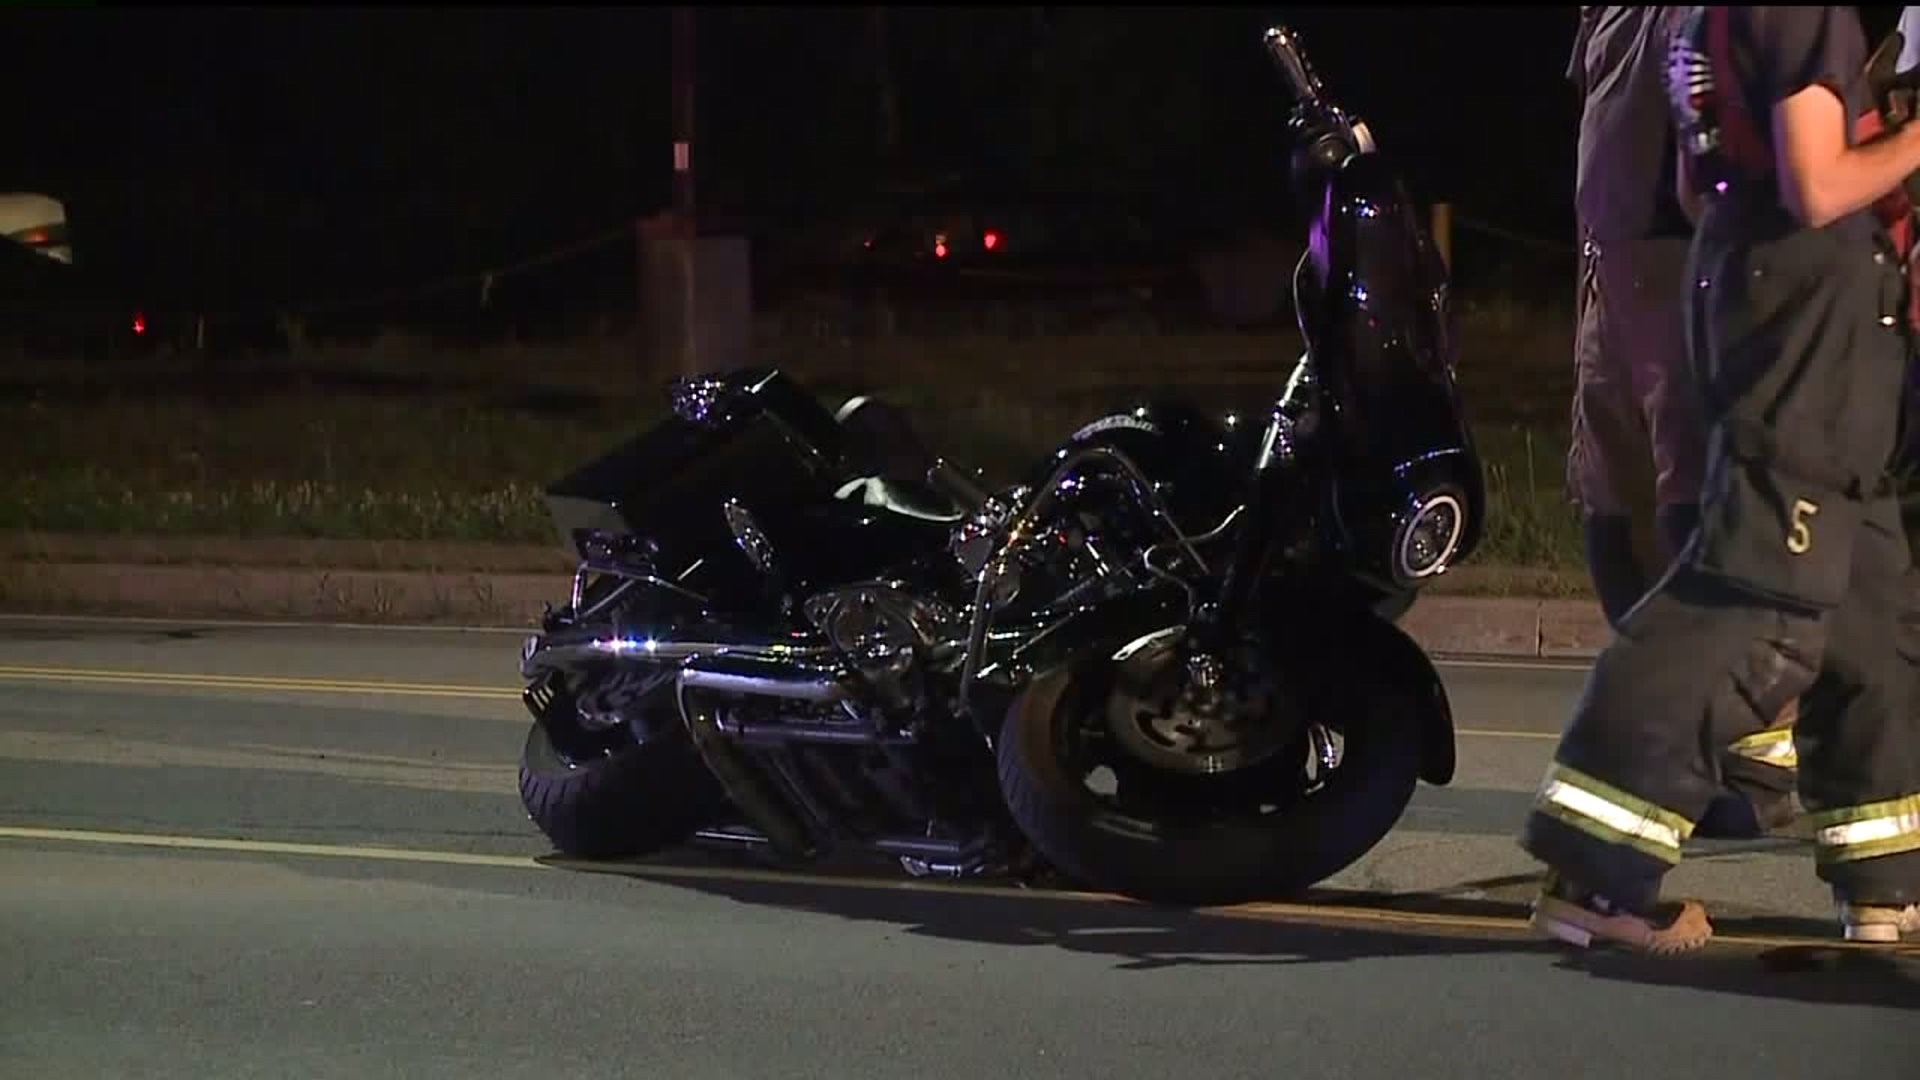 Driver in Custody After Crash with Motorcycle in Carbondale